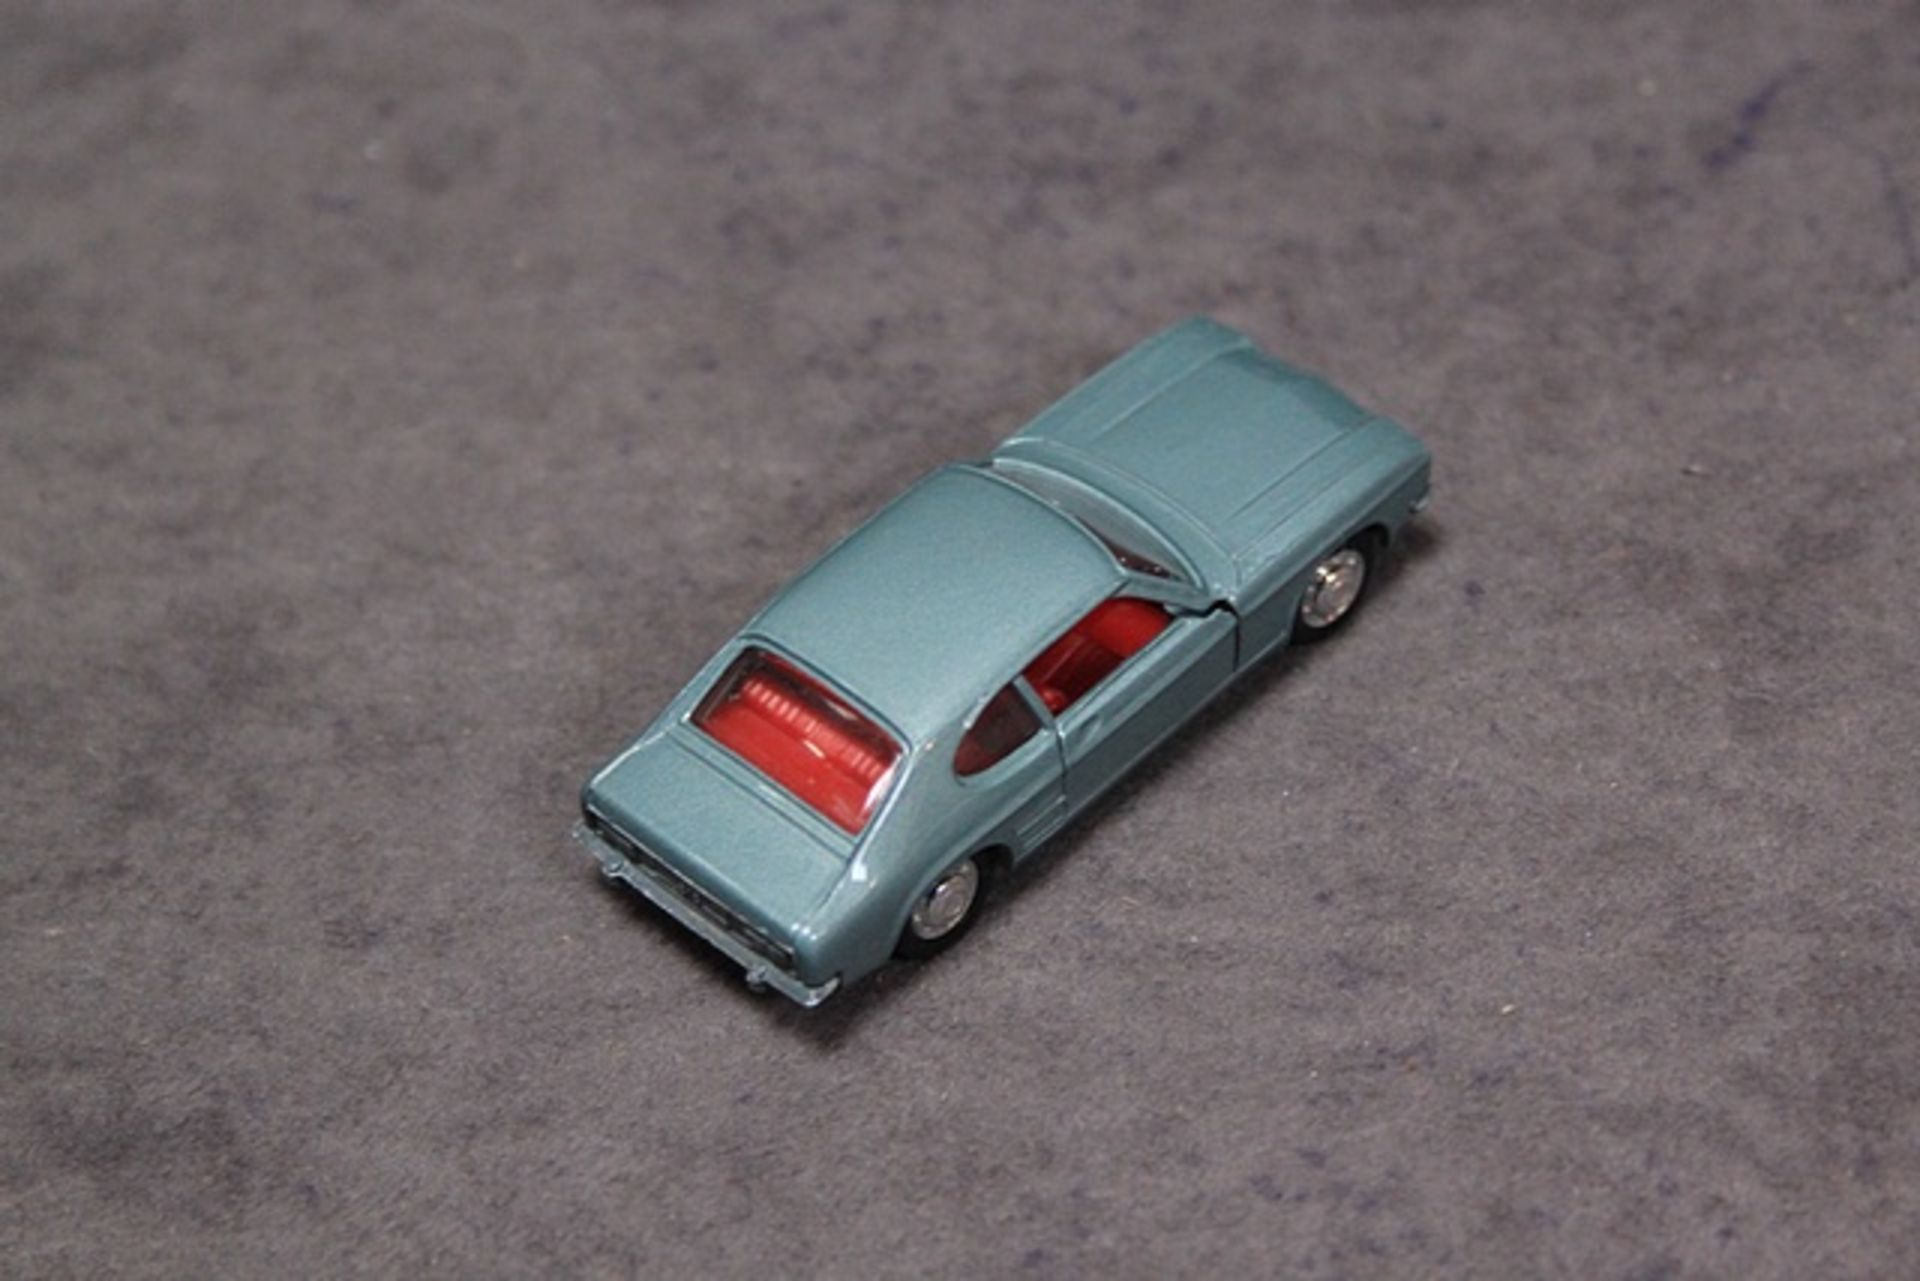 Schuco Diecast Modell #816 Ford Capri 1700GT in light blue in display case - Image 3 of 3